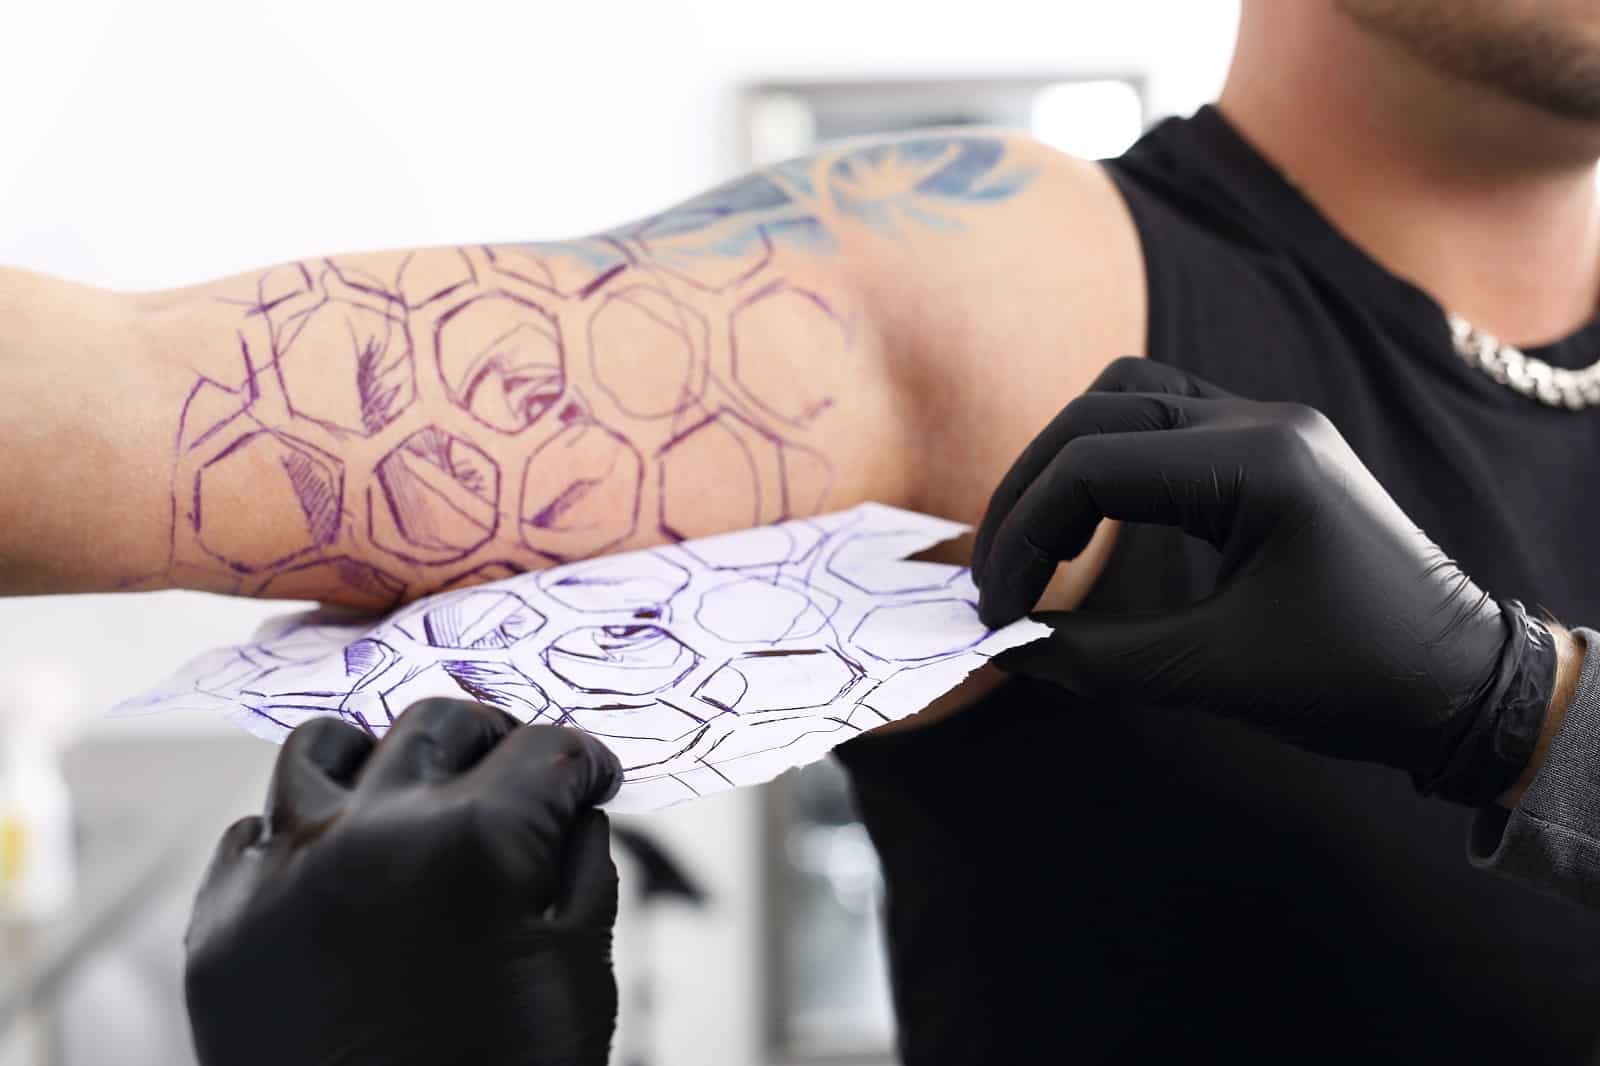 How to Use Tattoo Transfer Paper? How to Use Tattoo Paper for Inkjet & Laser Printers